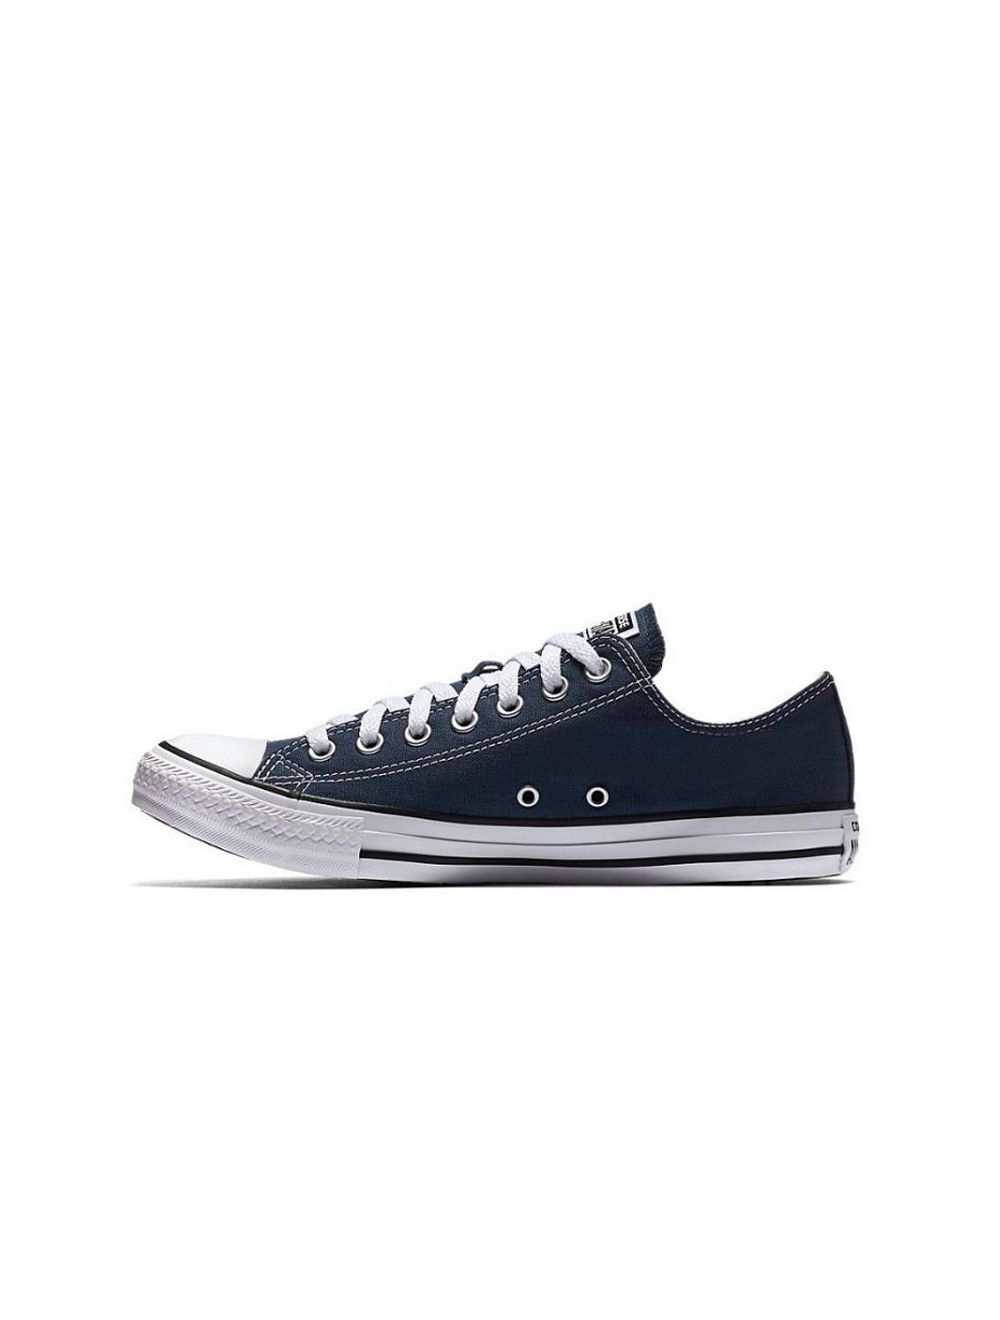 converse all star low navy canvas